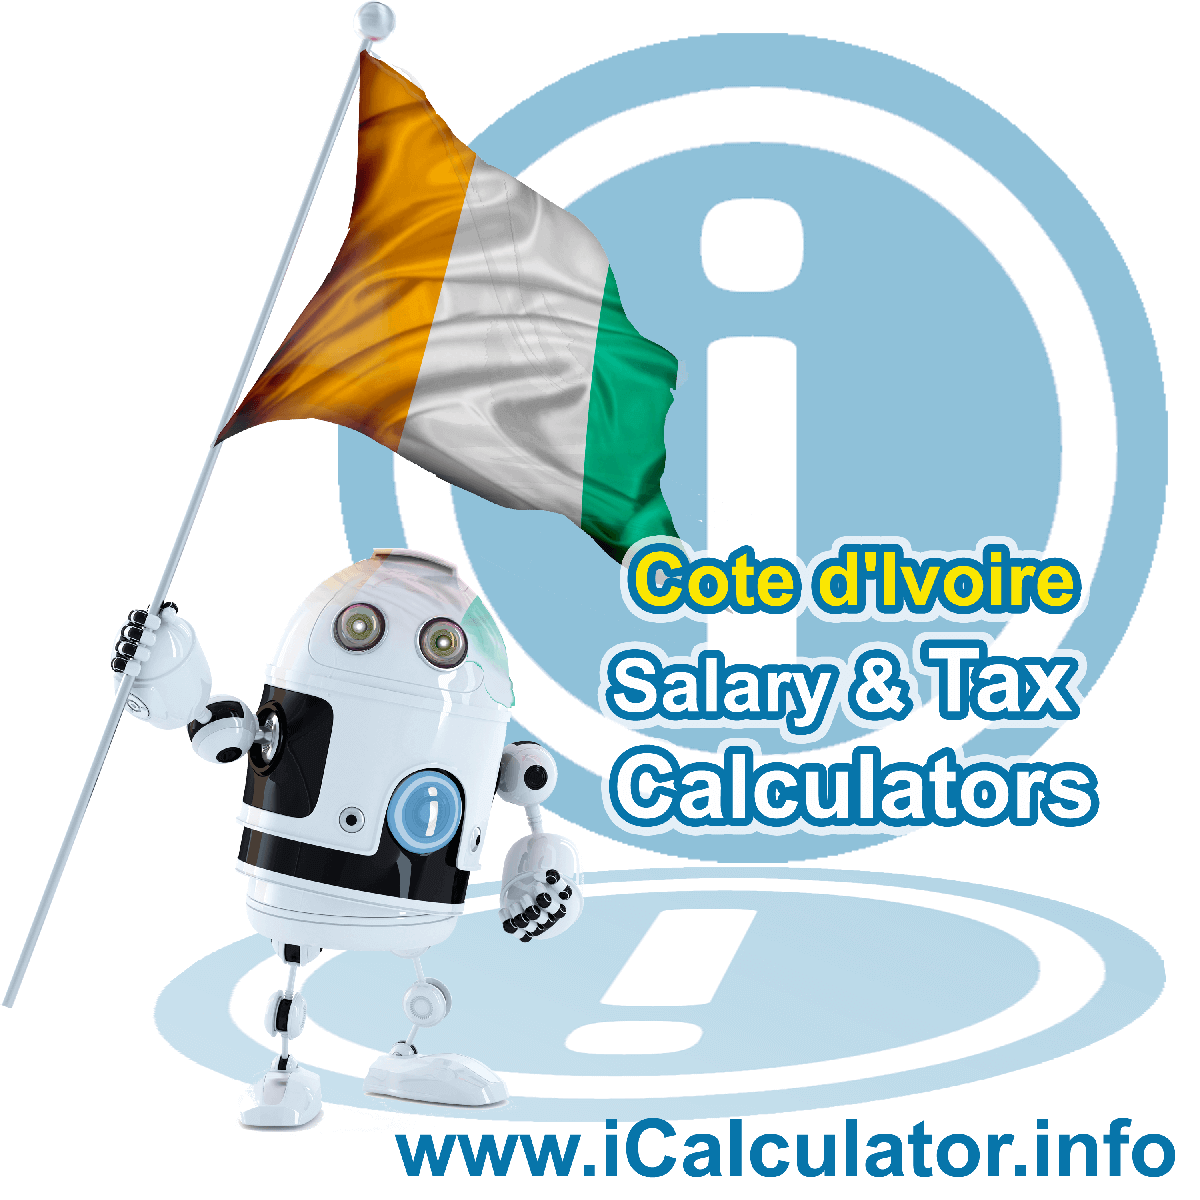 Cote Divoire Tax Calculator. This image shows the Cote Divoire flag and information relating to the tax formula for the Cote Divoire Salary Calculator